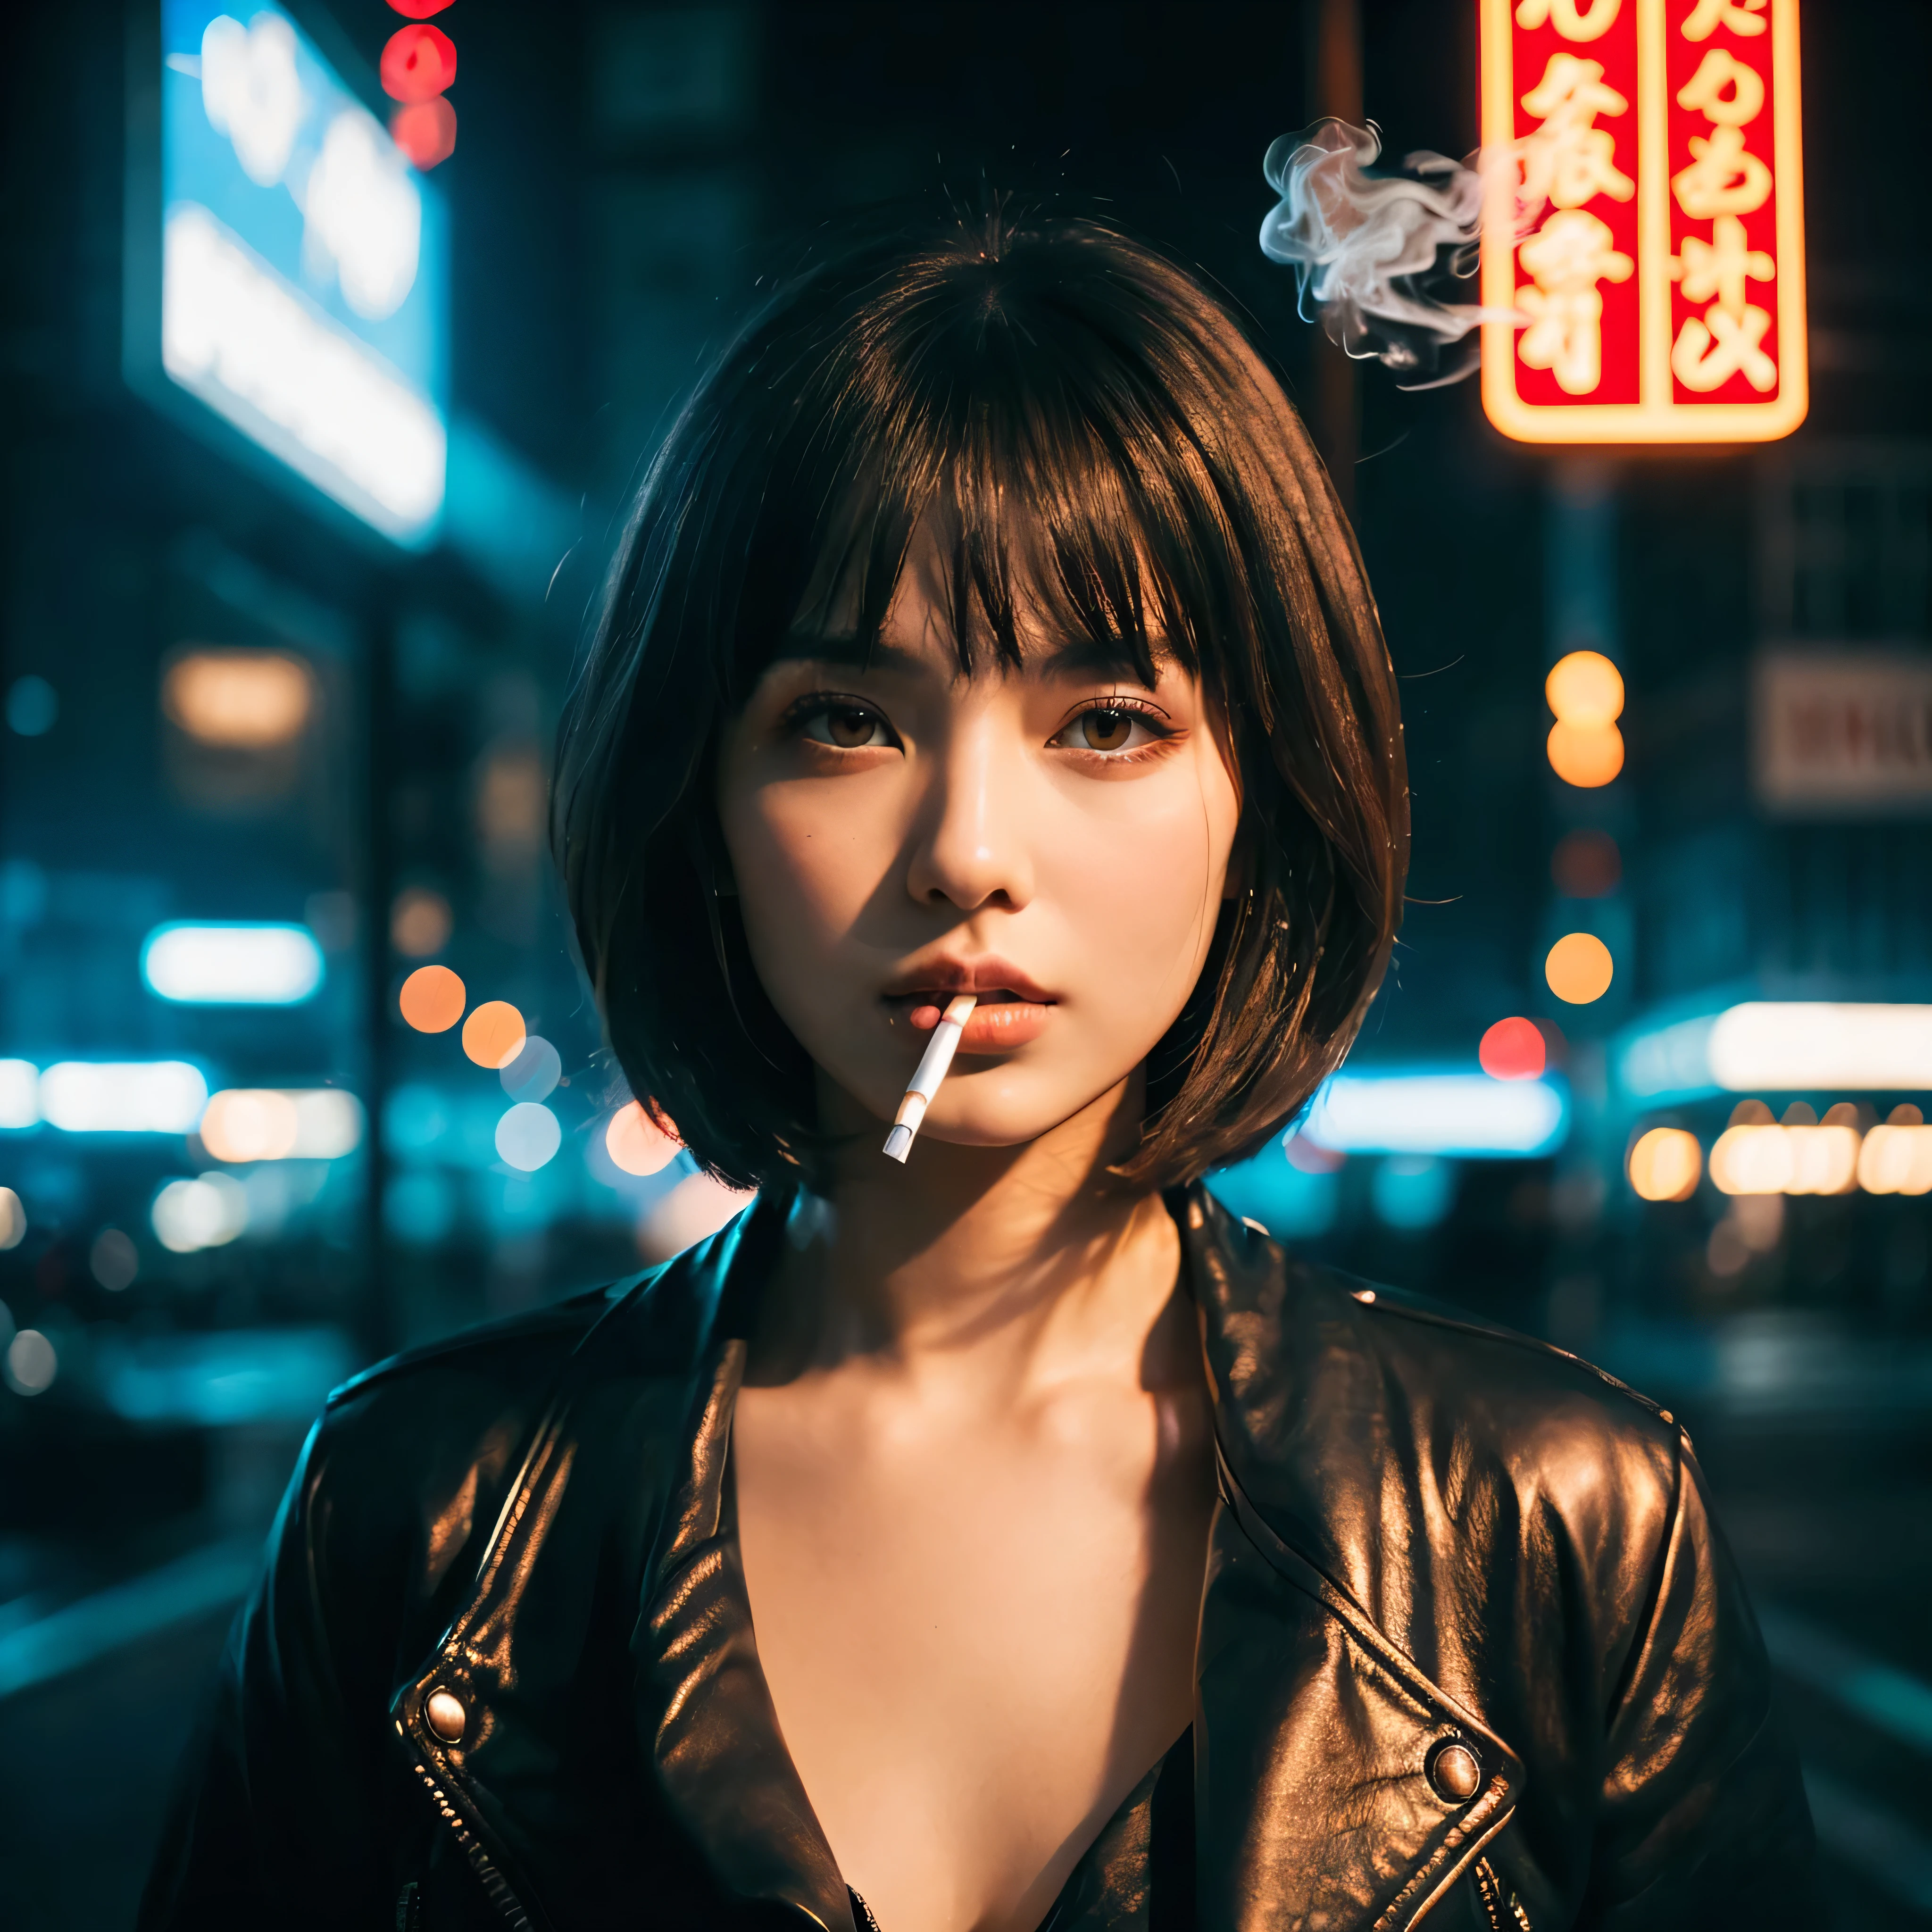 (Best Quality, Masterpiece, Ultra High Definition, High resolution, highly detailed, High Definition Face:1.5), (20-year-old woman, full body photo:1.3), 1 beautiful woman, (Beautiful woman with a cigarette in her mouth, Smoke is coming out of the cigarette:1.5), (beautiful woman wearing Beautiful woman wearing a leather jacket, neon color fashion:1.3), (beautiful eyes, light in the eyes, eyes are in focus), white skin, Glossy, shiny skin, very Fair skin, (film photography style, photo with strong shadows, Background neon light, City of night, cyber punk:1.2), Poker face, violently fluttering hair, random hair styles, random hair color, Slim Big Breasts, 